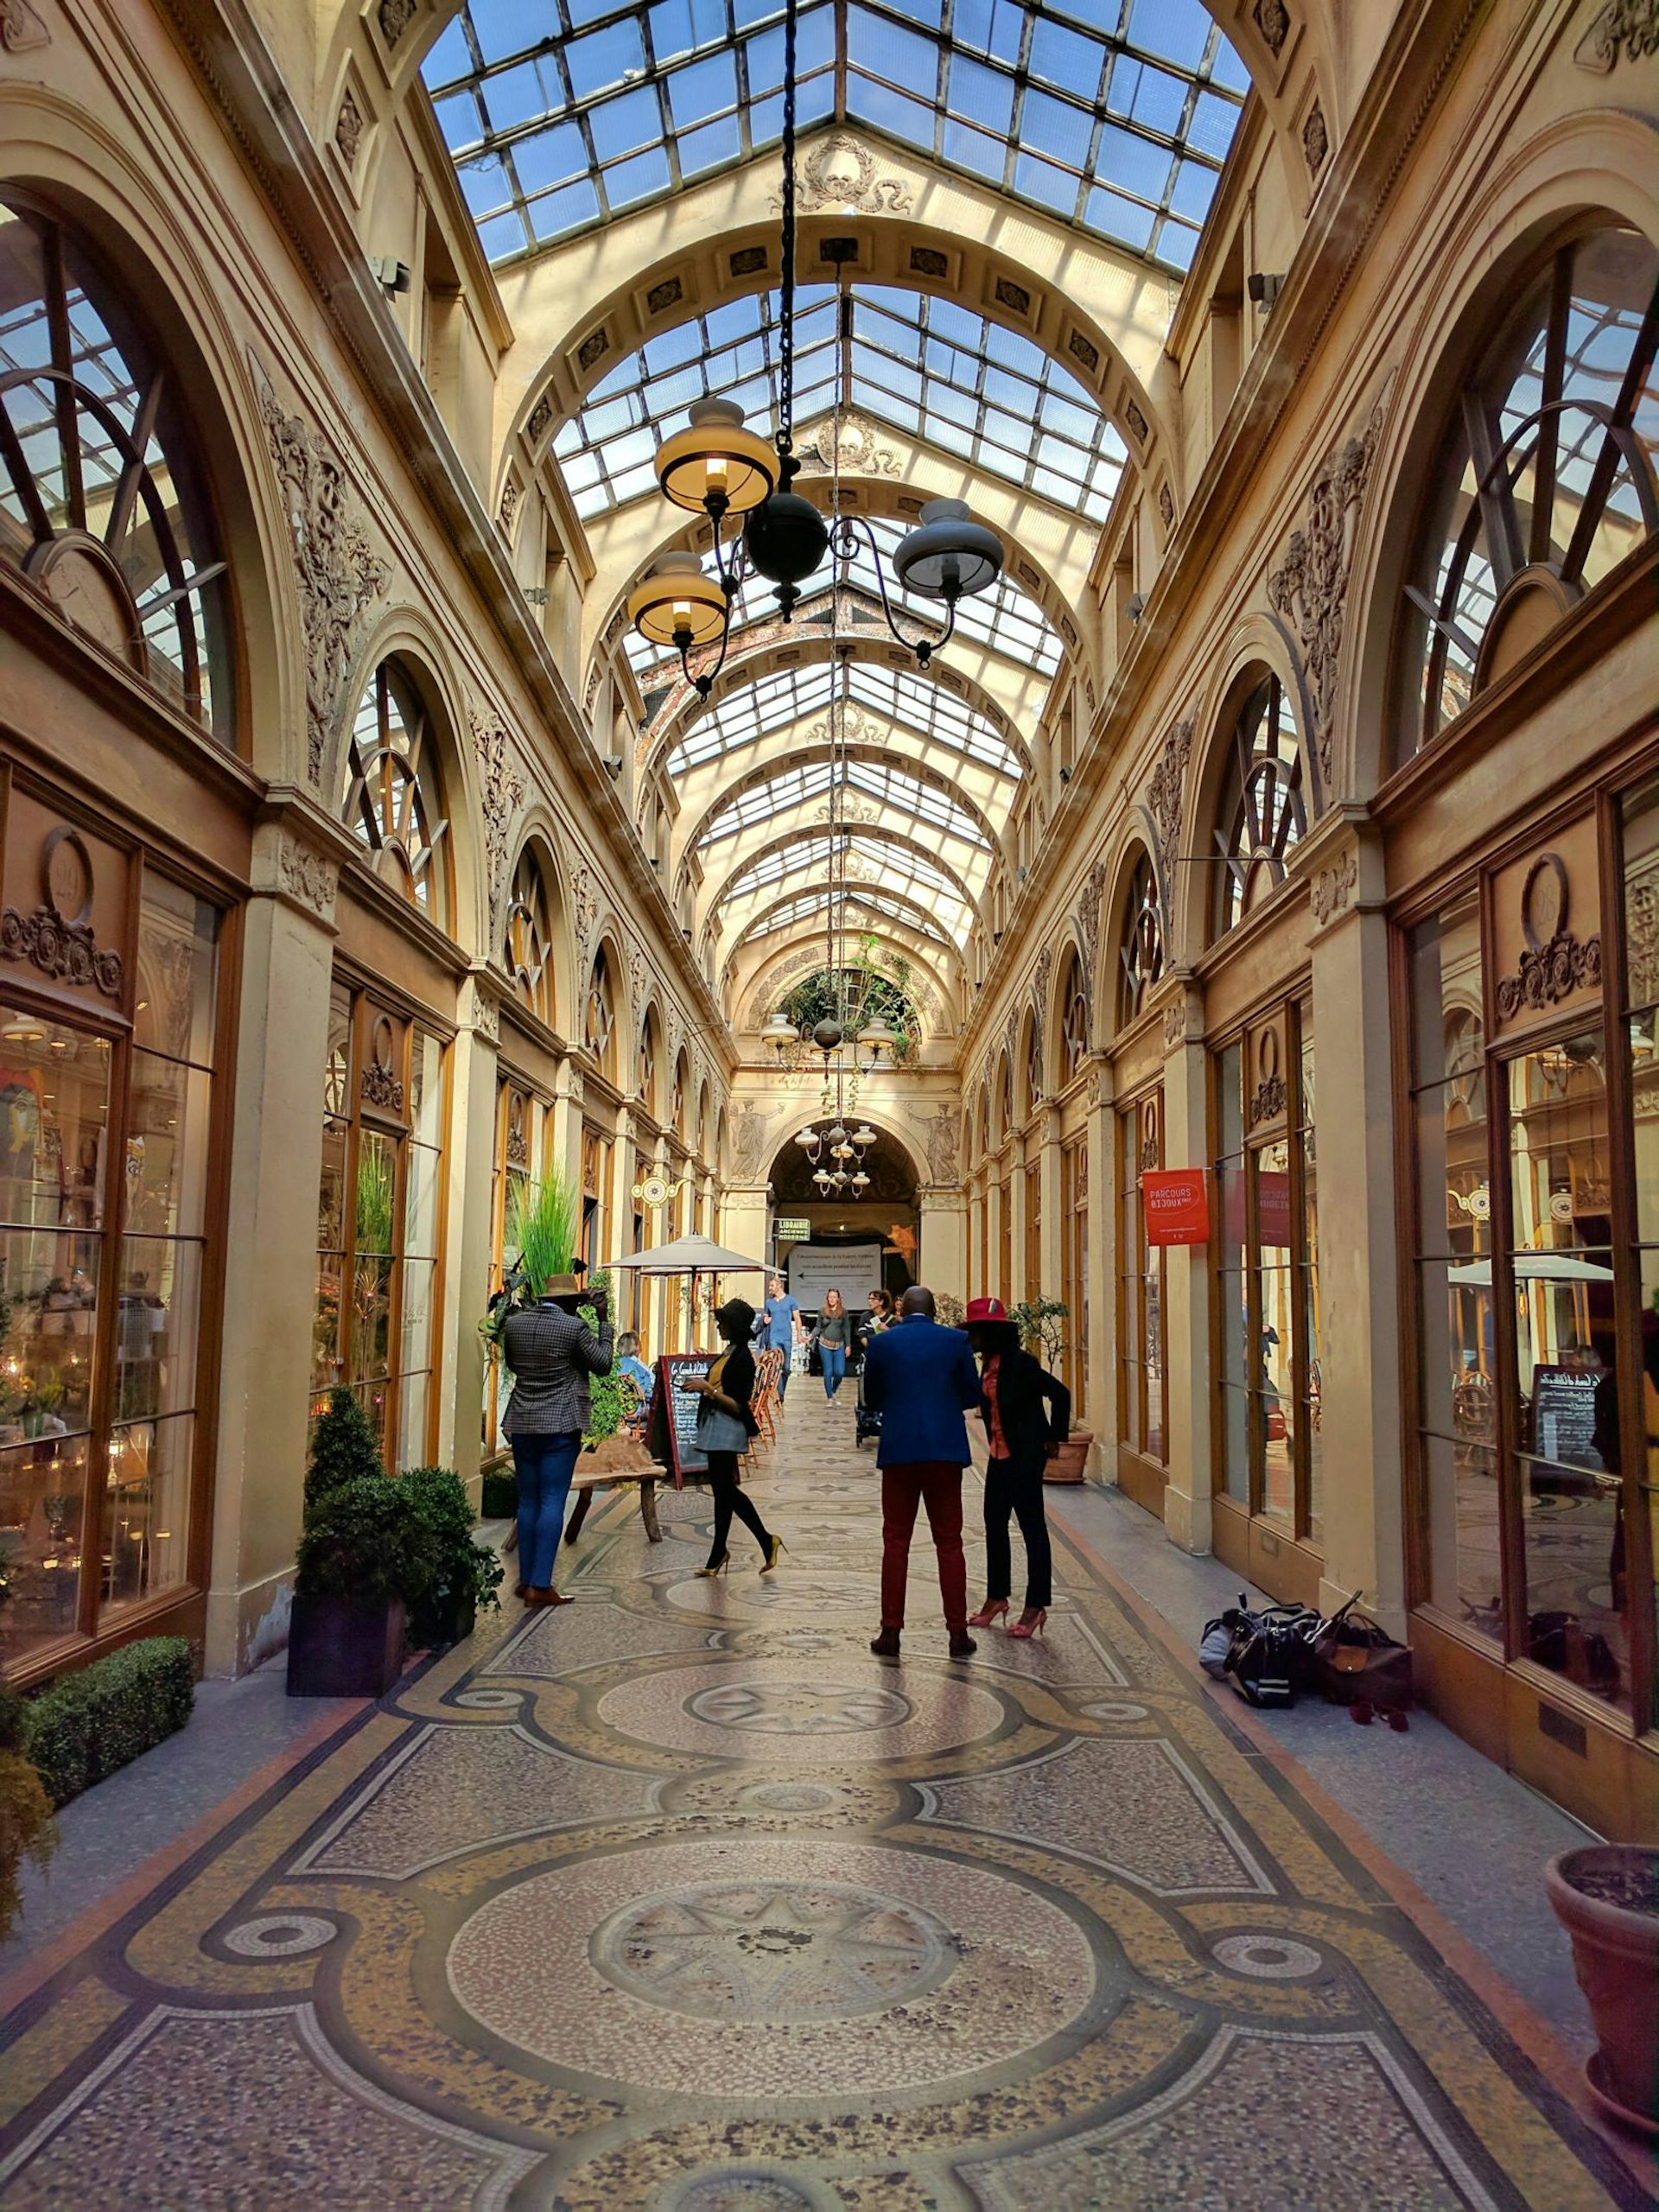 Sun sines through the glass roof of the Galerie Vivienne in Paris onto shoppers